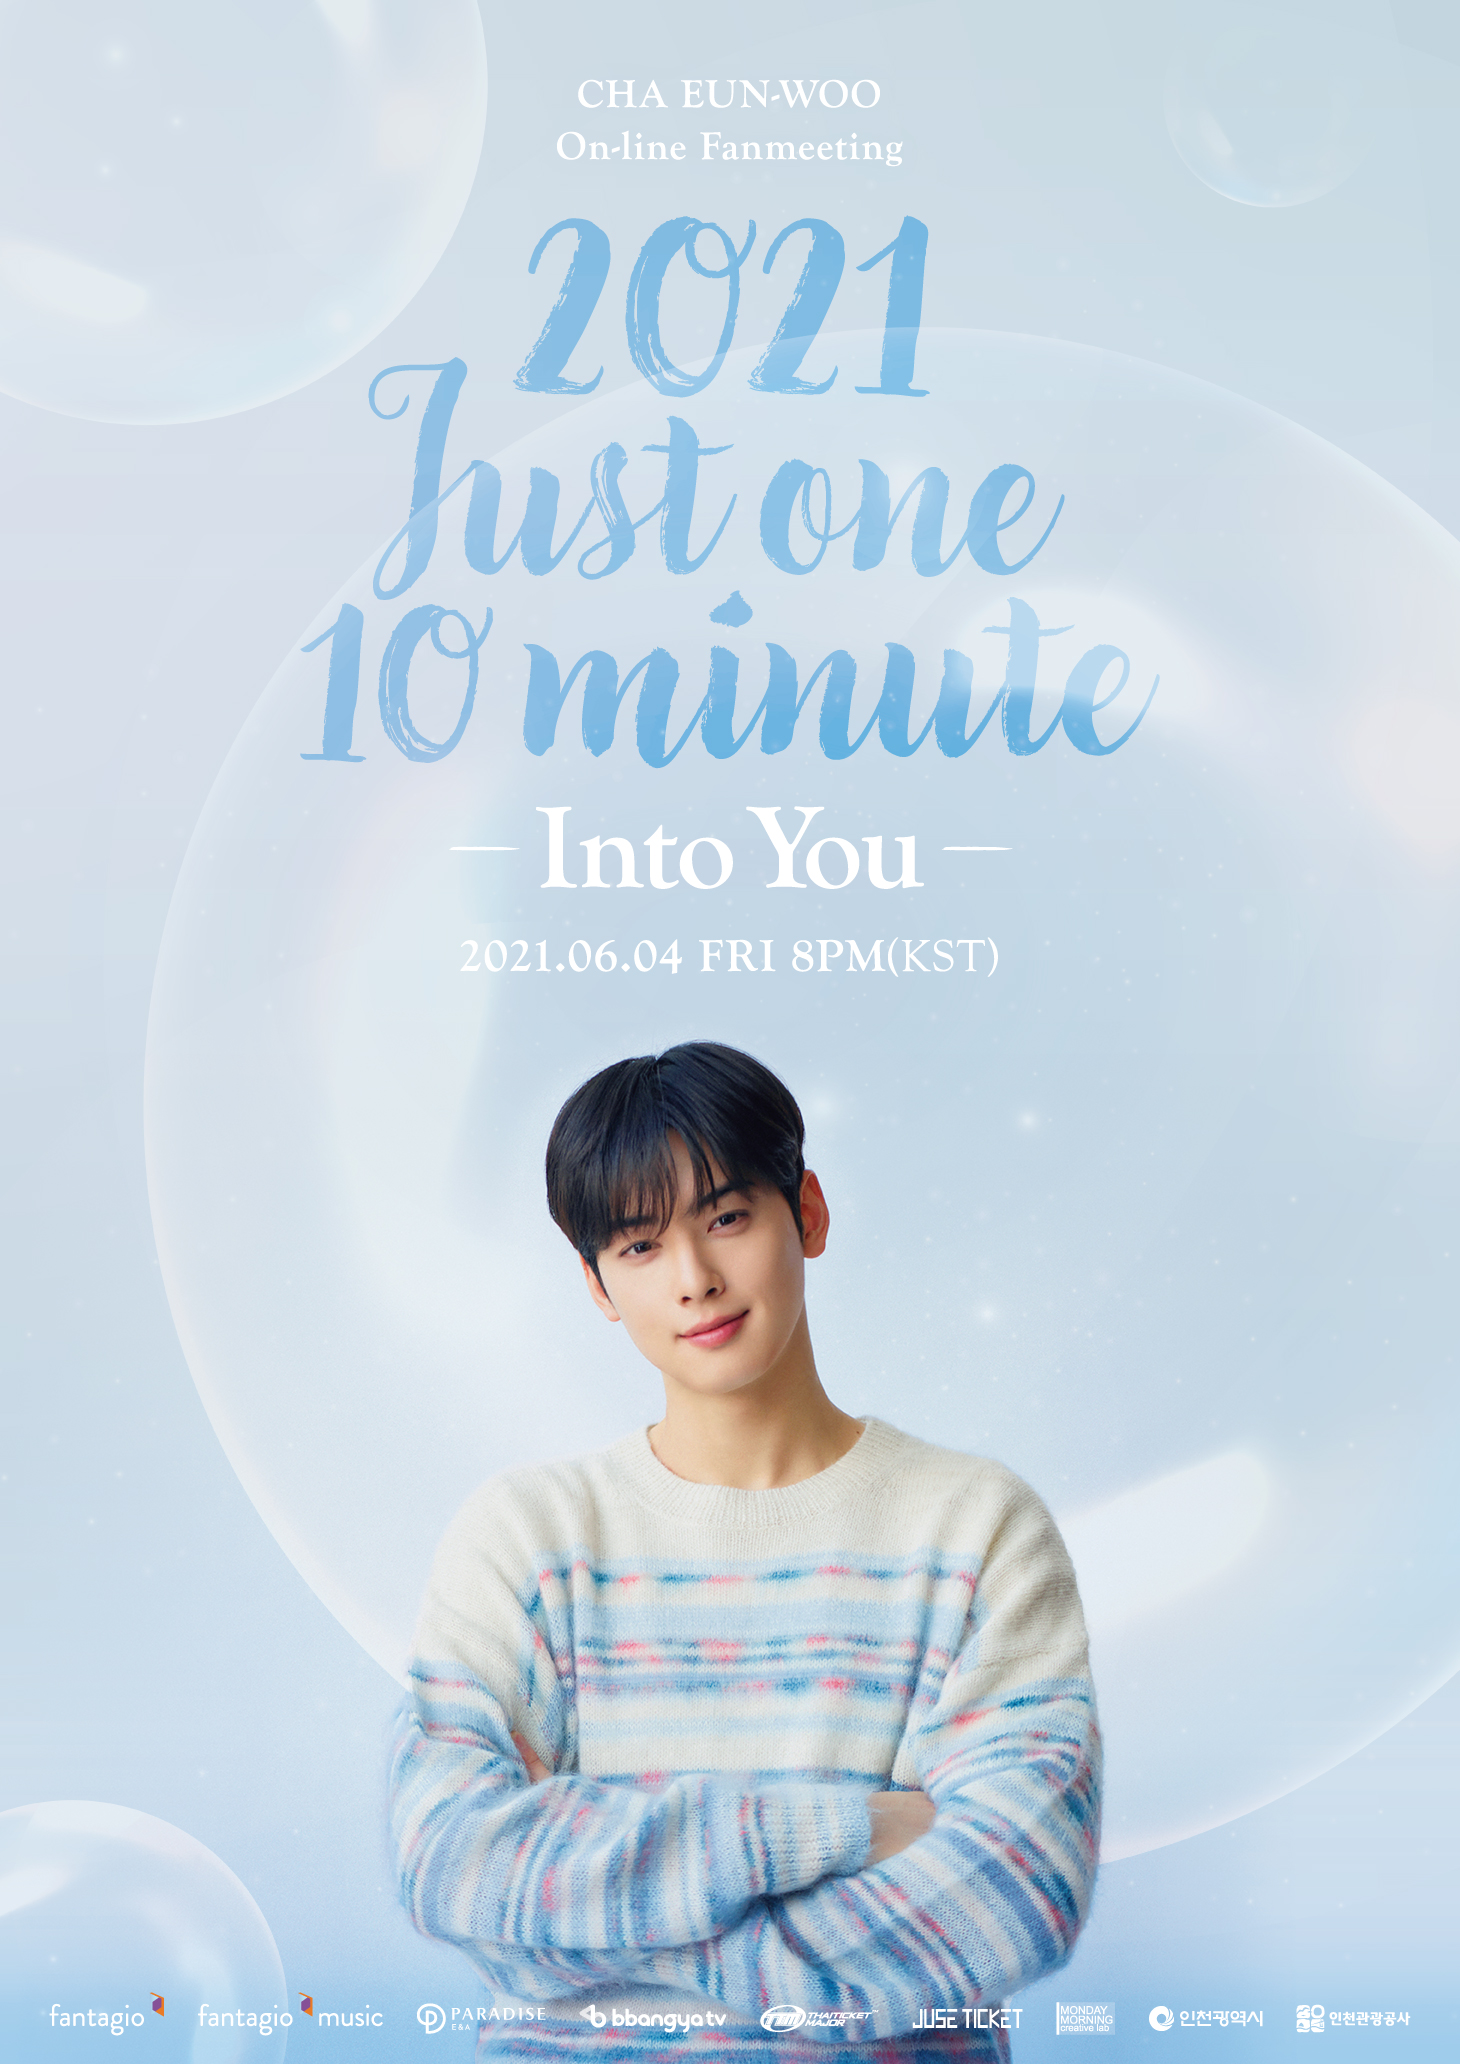 CHA EUN-WOO On-line Fanmeeting [2021 Just One 10 Minute ~Into You ...